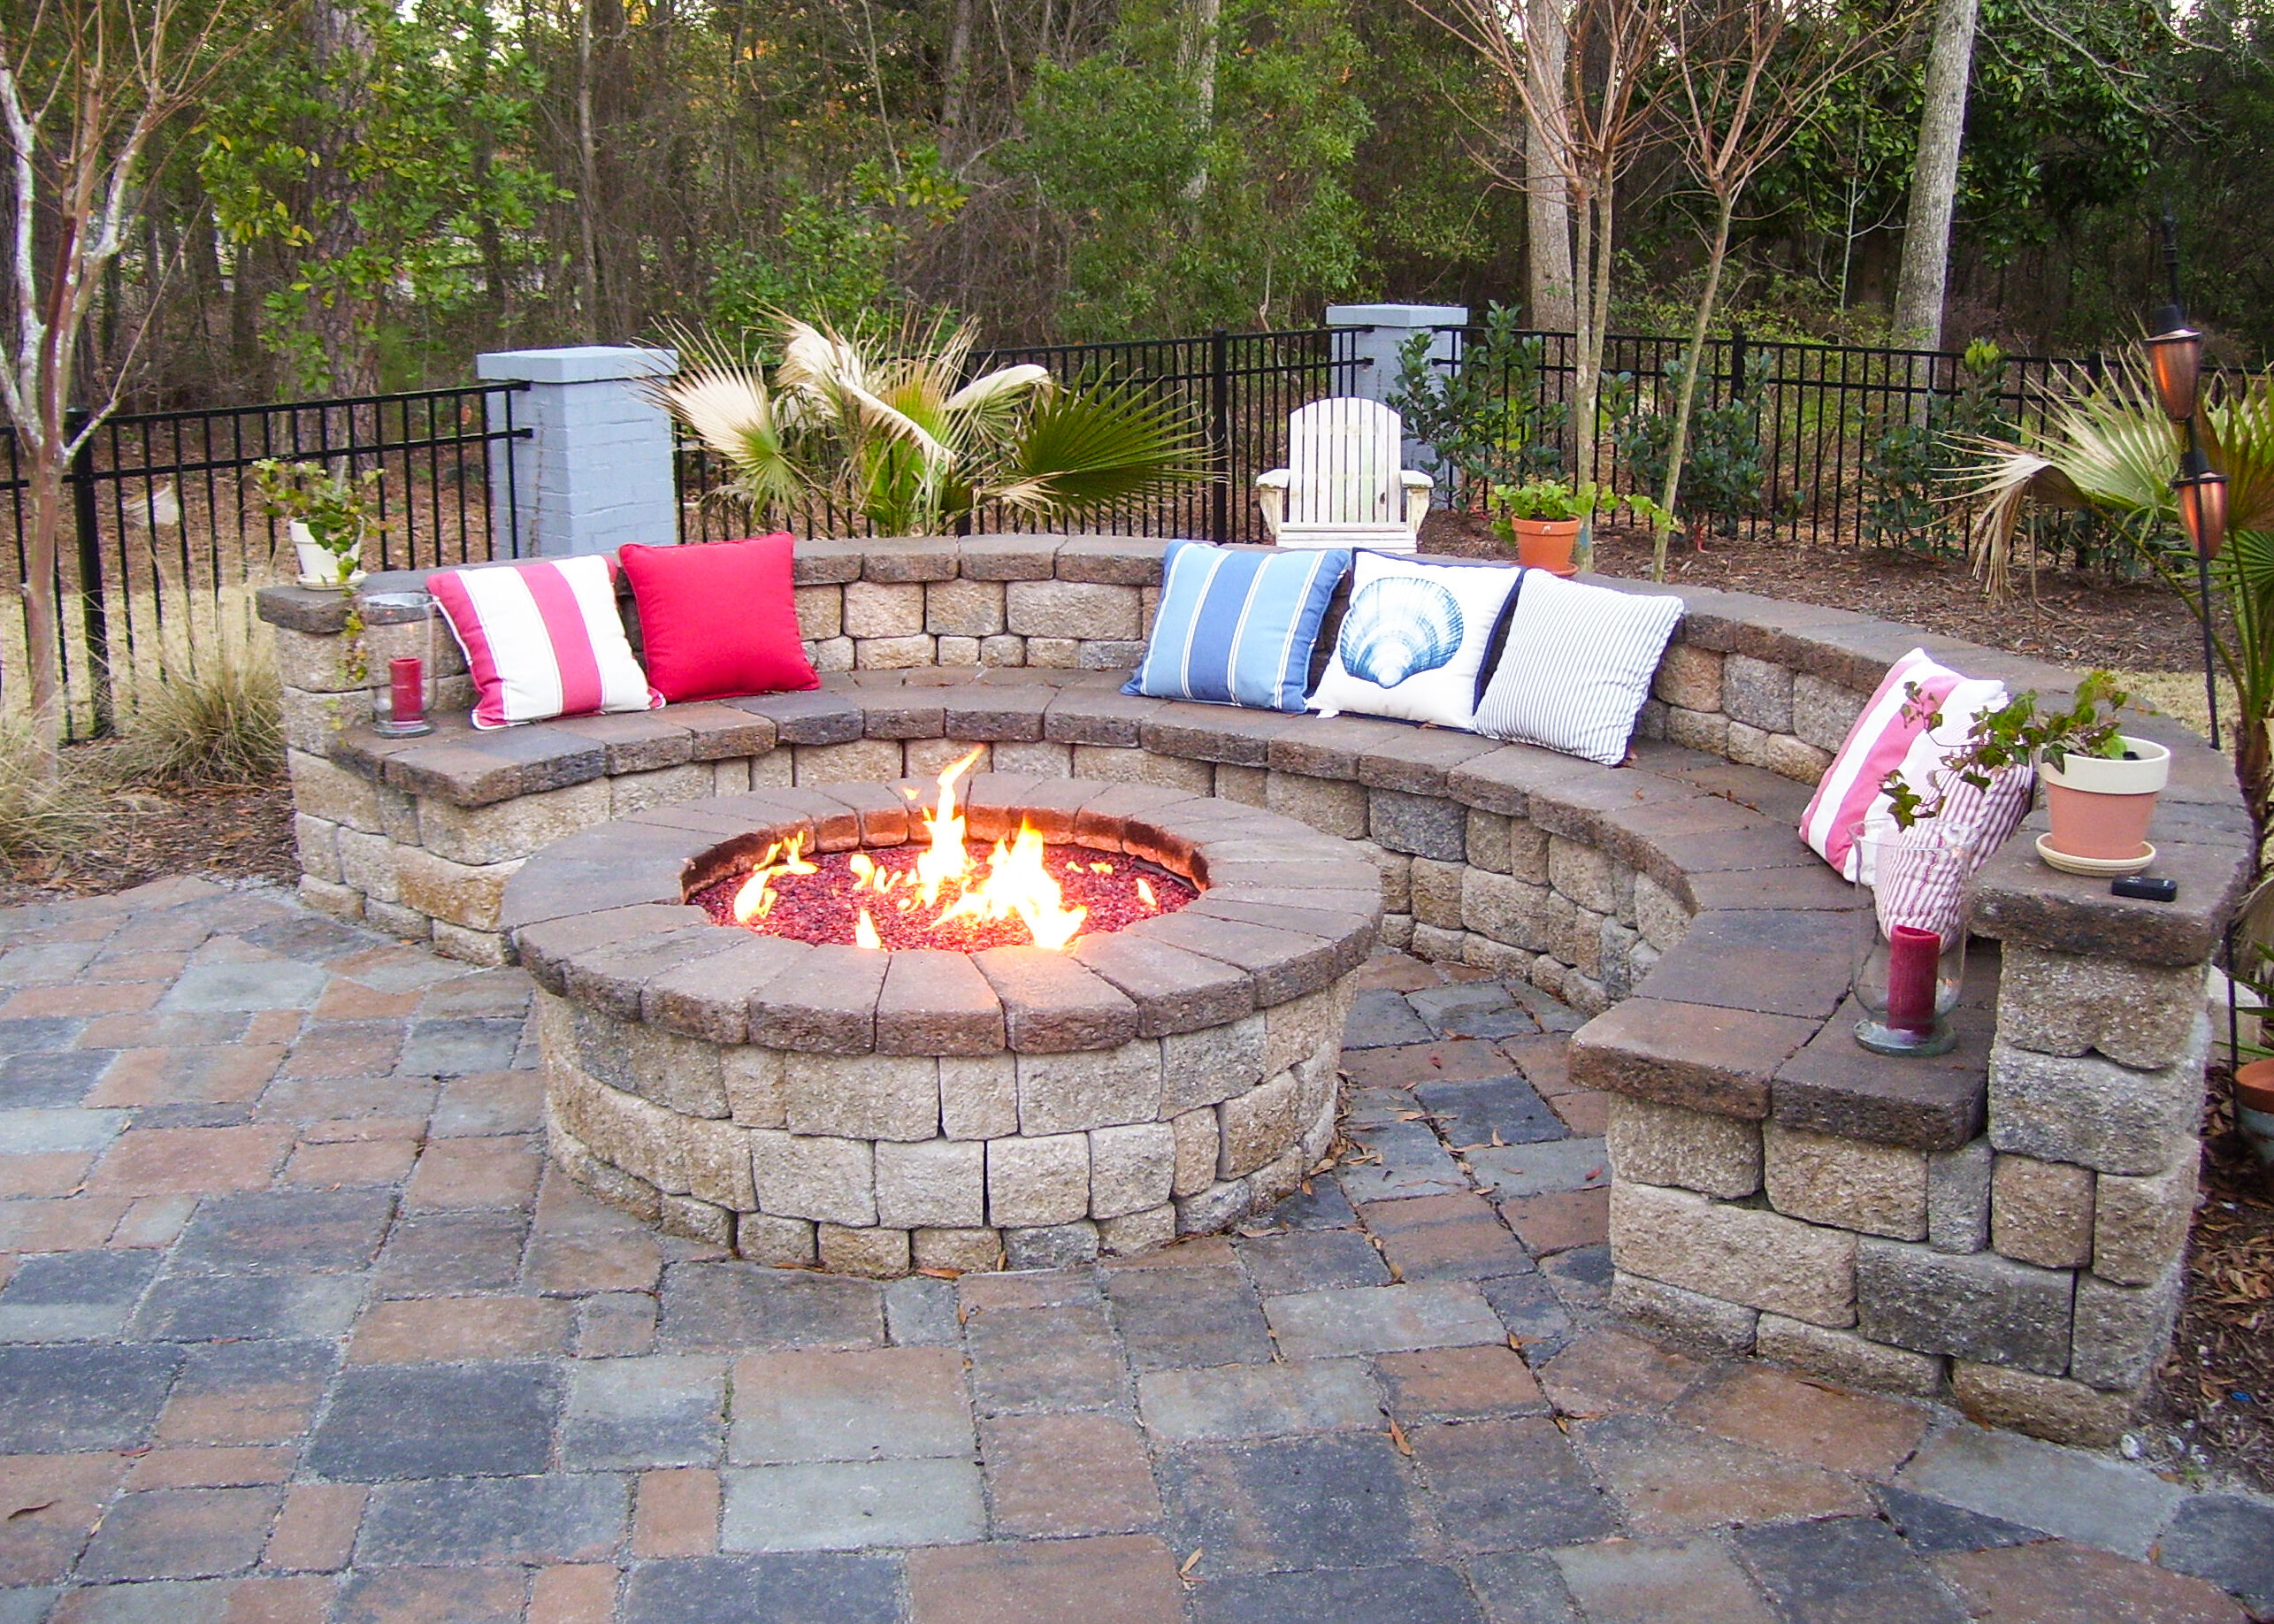 3 Easy Diy Fire Pit Ideas, Inexpensive Fire Pit Ideas